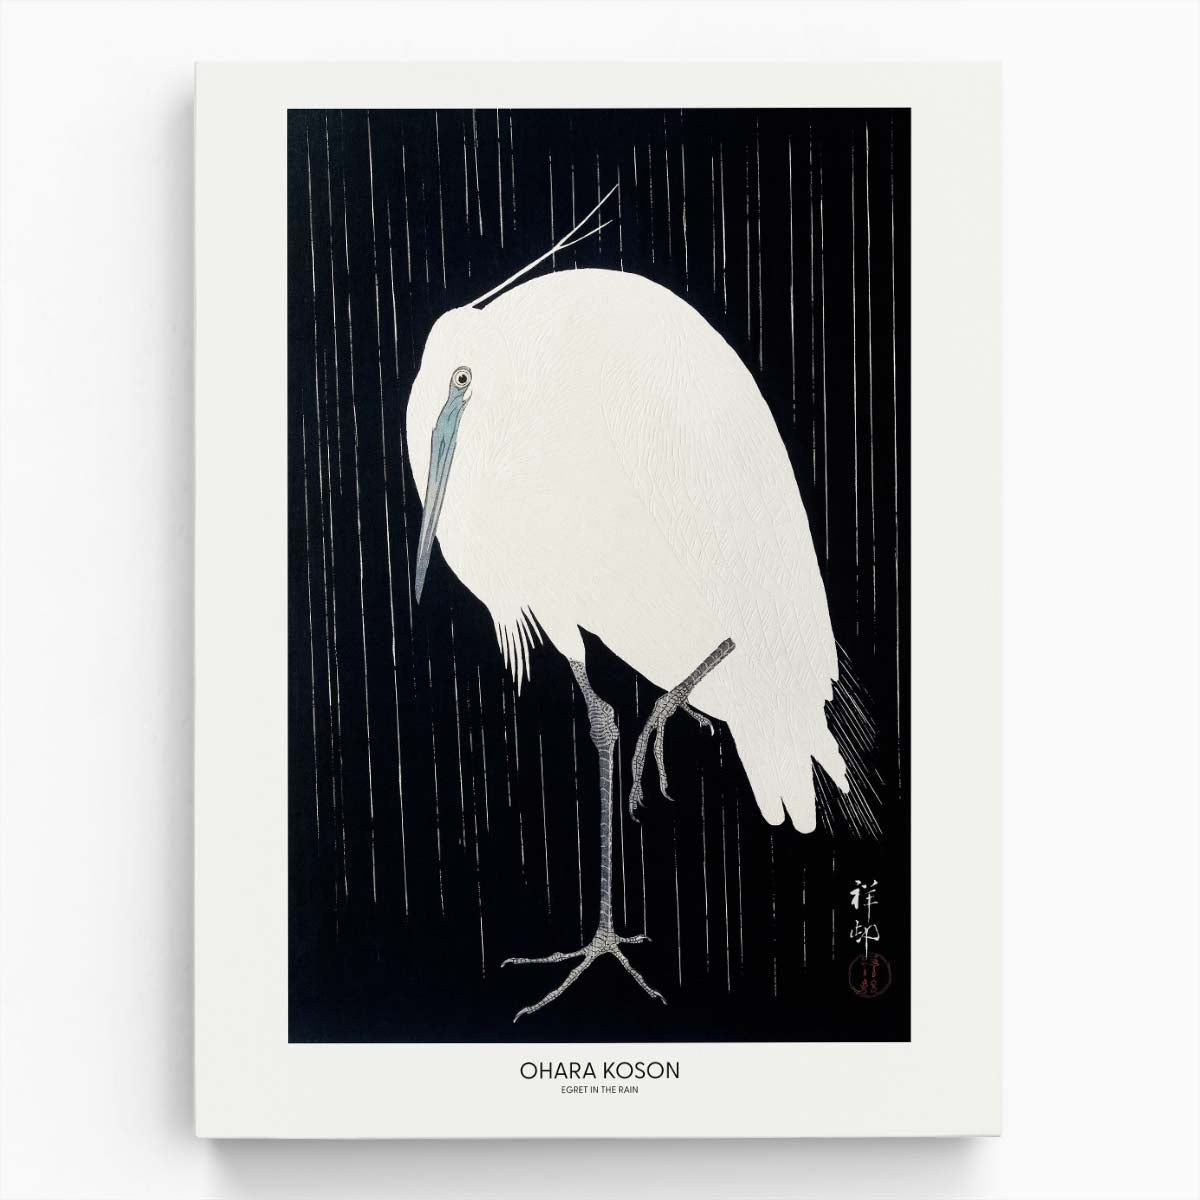 Vintage Japanese Egret Illustration in Rain by Ohara Koson Poster by Luxuriance Designs, made in USA